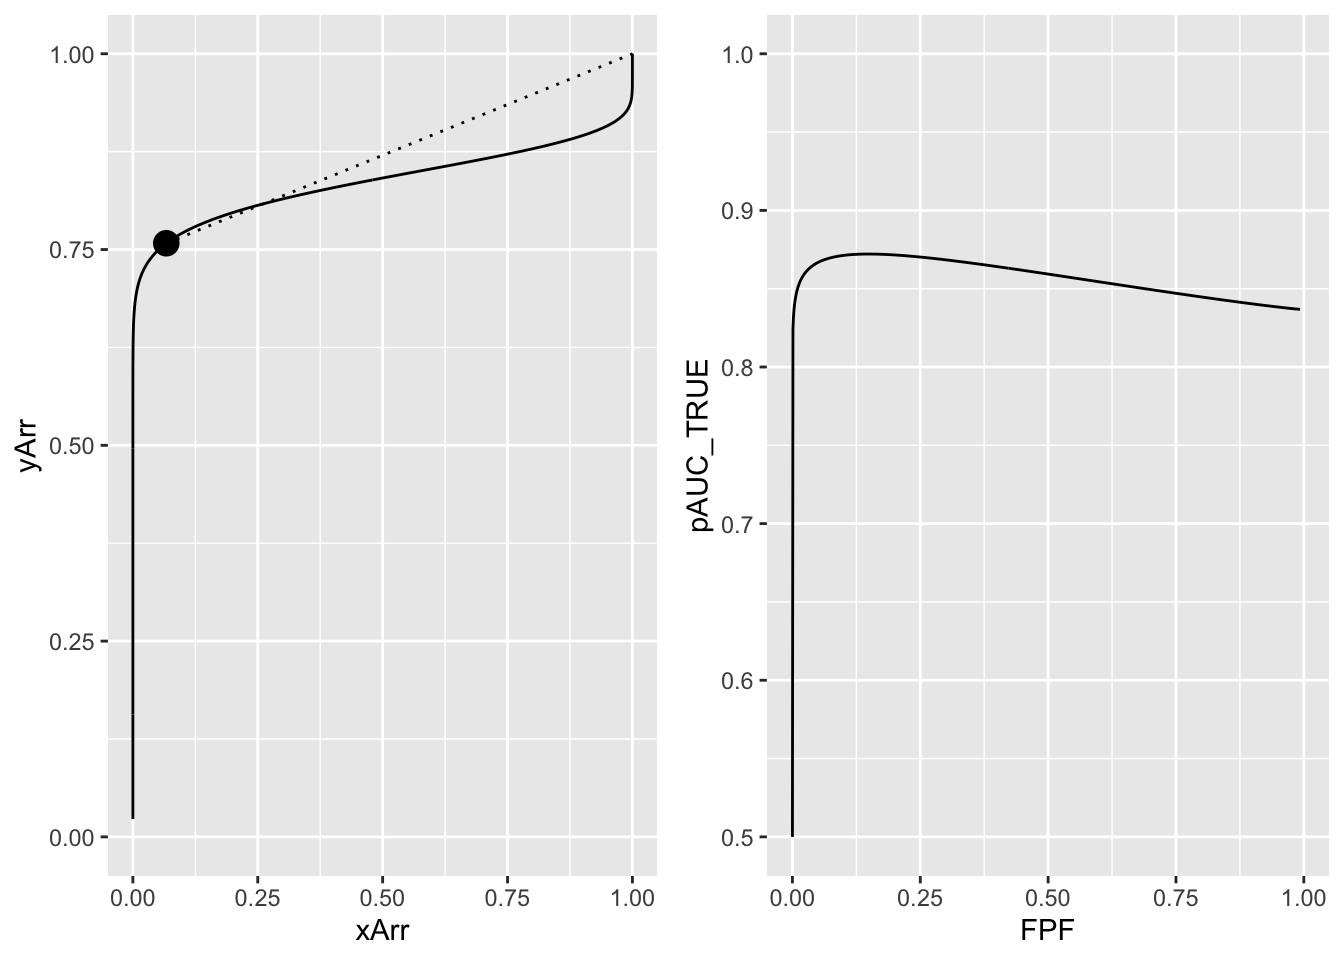 The left panel shows the visibly improper ROC curve for a = 1 and b = 0.2. The solid line is below the dotted line. The right panel shows the variation of true performance pAUC_TRUE with FPF. True performance is maximized at FPF = 0.153. Since improper ROC fits are fitting artifacts, this example does not negate the previous finding that true performance for a proper ROC curve is maximized by setting the threshold to report all cases, i.e., FPF = 1.